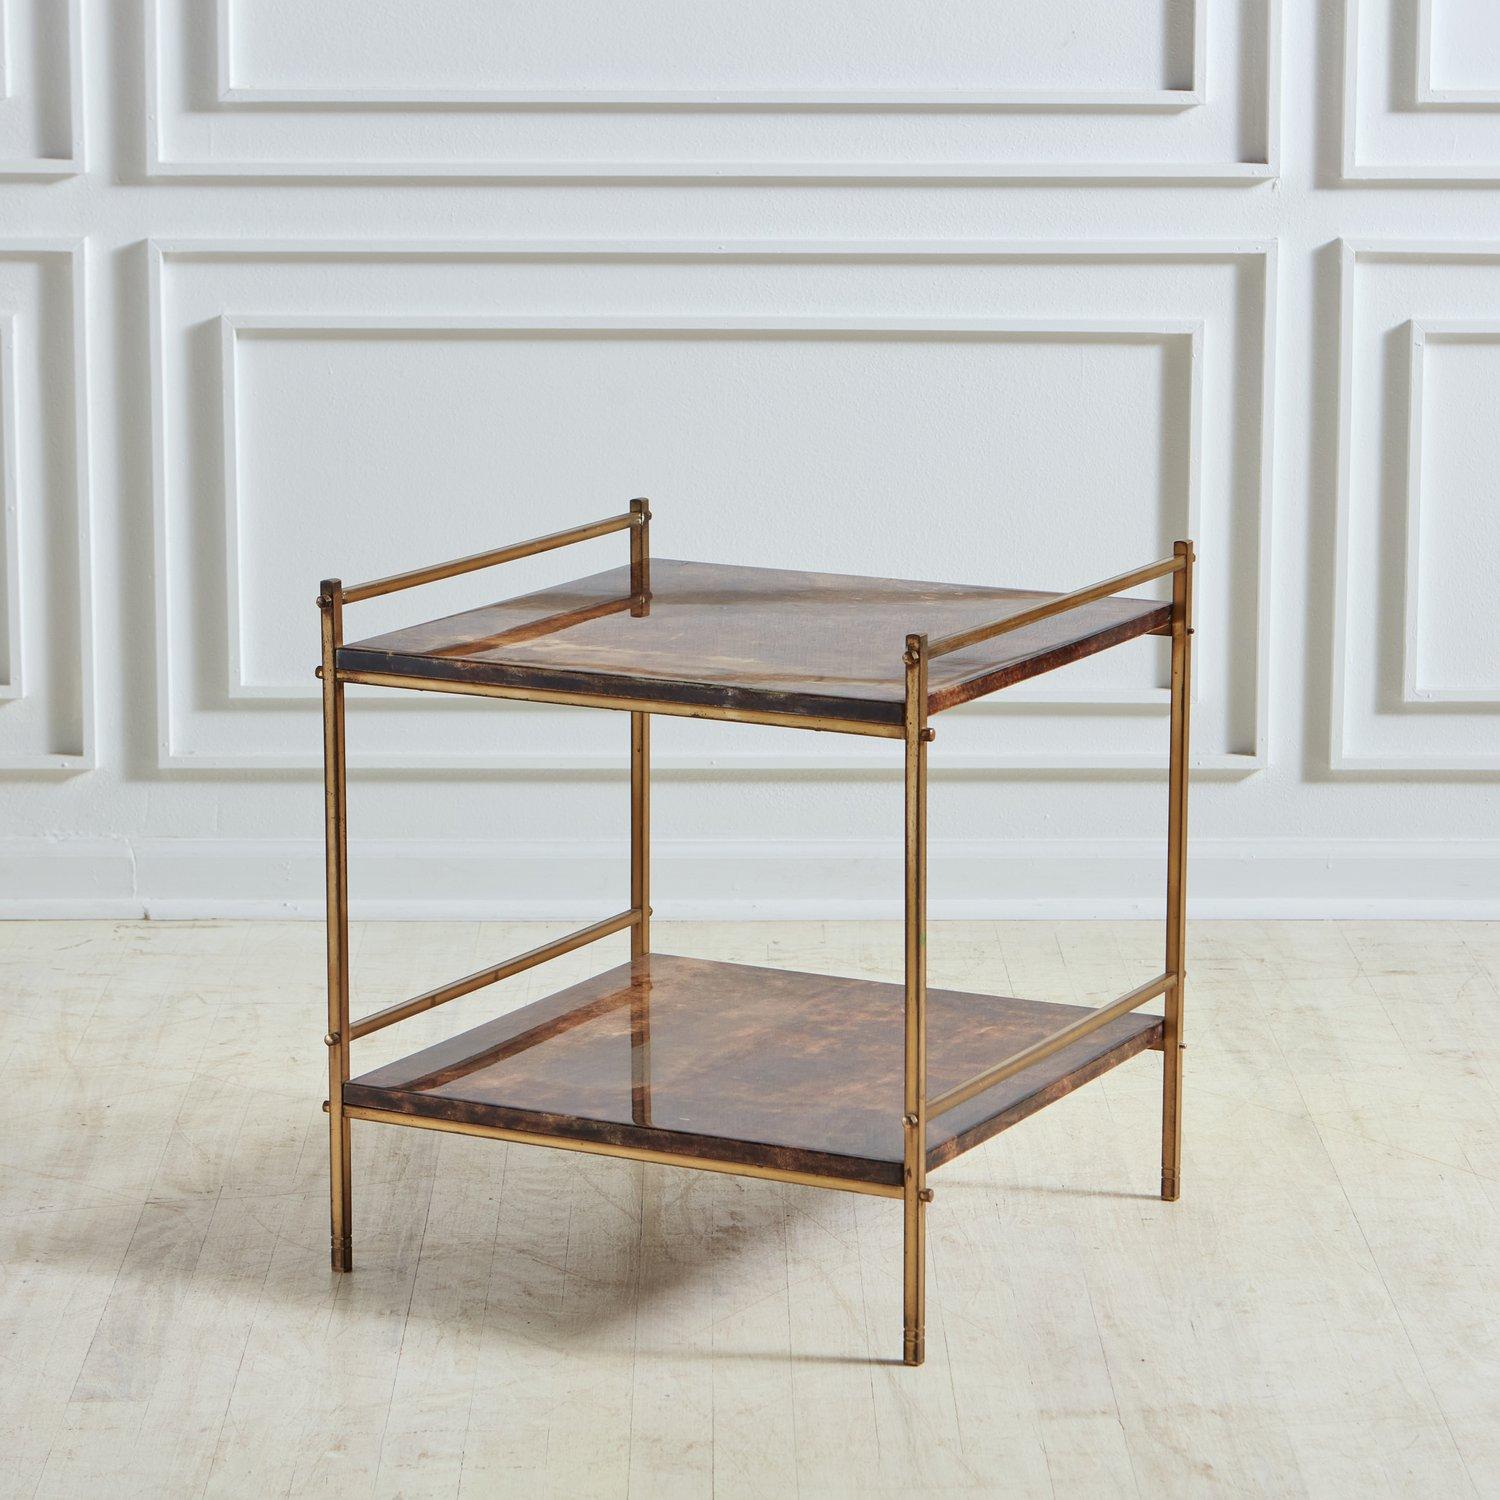 A vintage Italian two-tier side table in the style of Aldo Tura. This table has a sleek patinated brass frame and two square shelves with a lacquered parchment finish in a deep brown hue with subtle color variations. Sourced in Italy, 20th Century.

